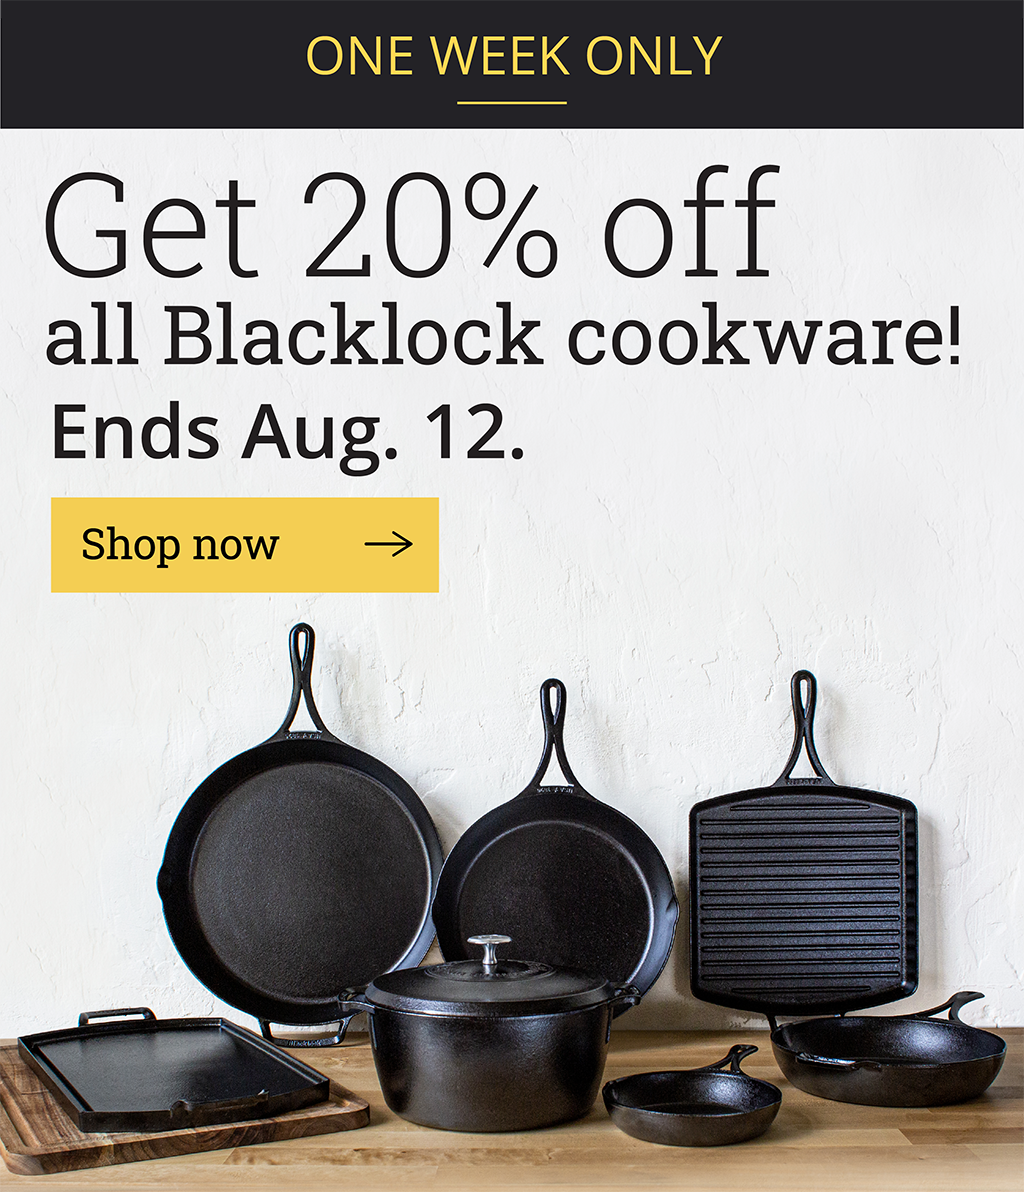 ONE WEEK ONLY  Get 20% off all Blacklock cast iron cookware!  Ends Aug. 12.  [Shop now-->]